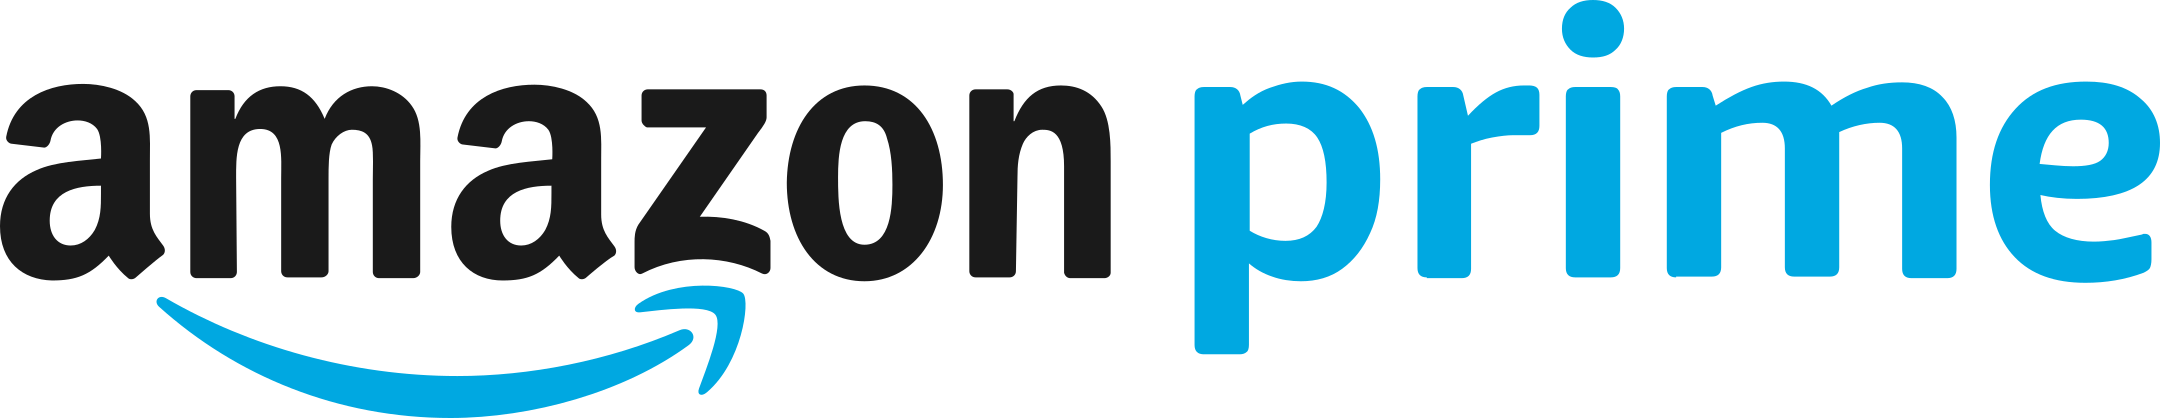 Amazon Prime Logo - PNG and Vector - Logo Download